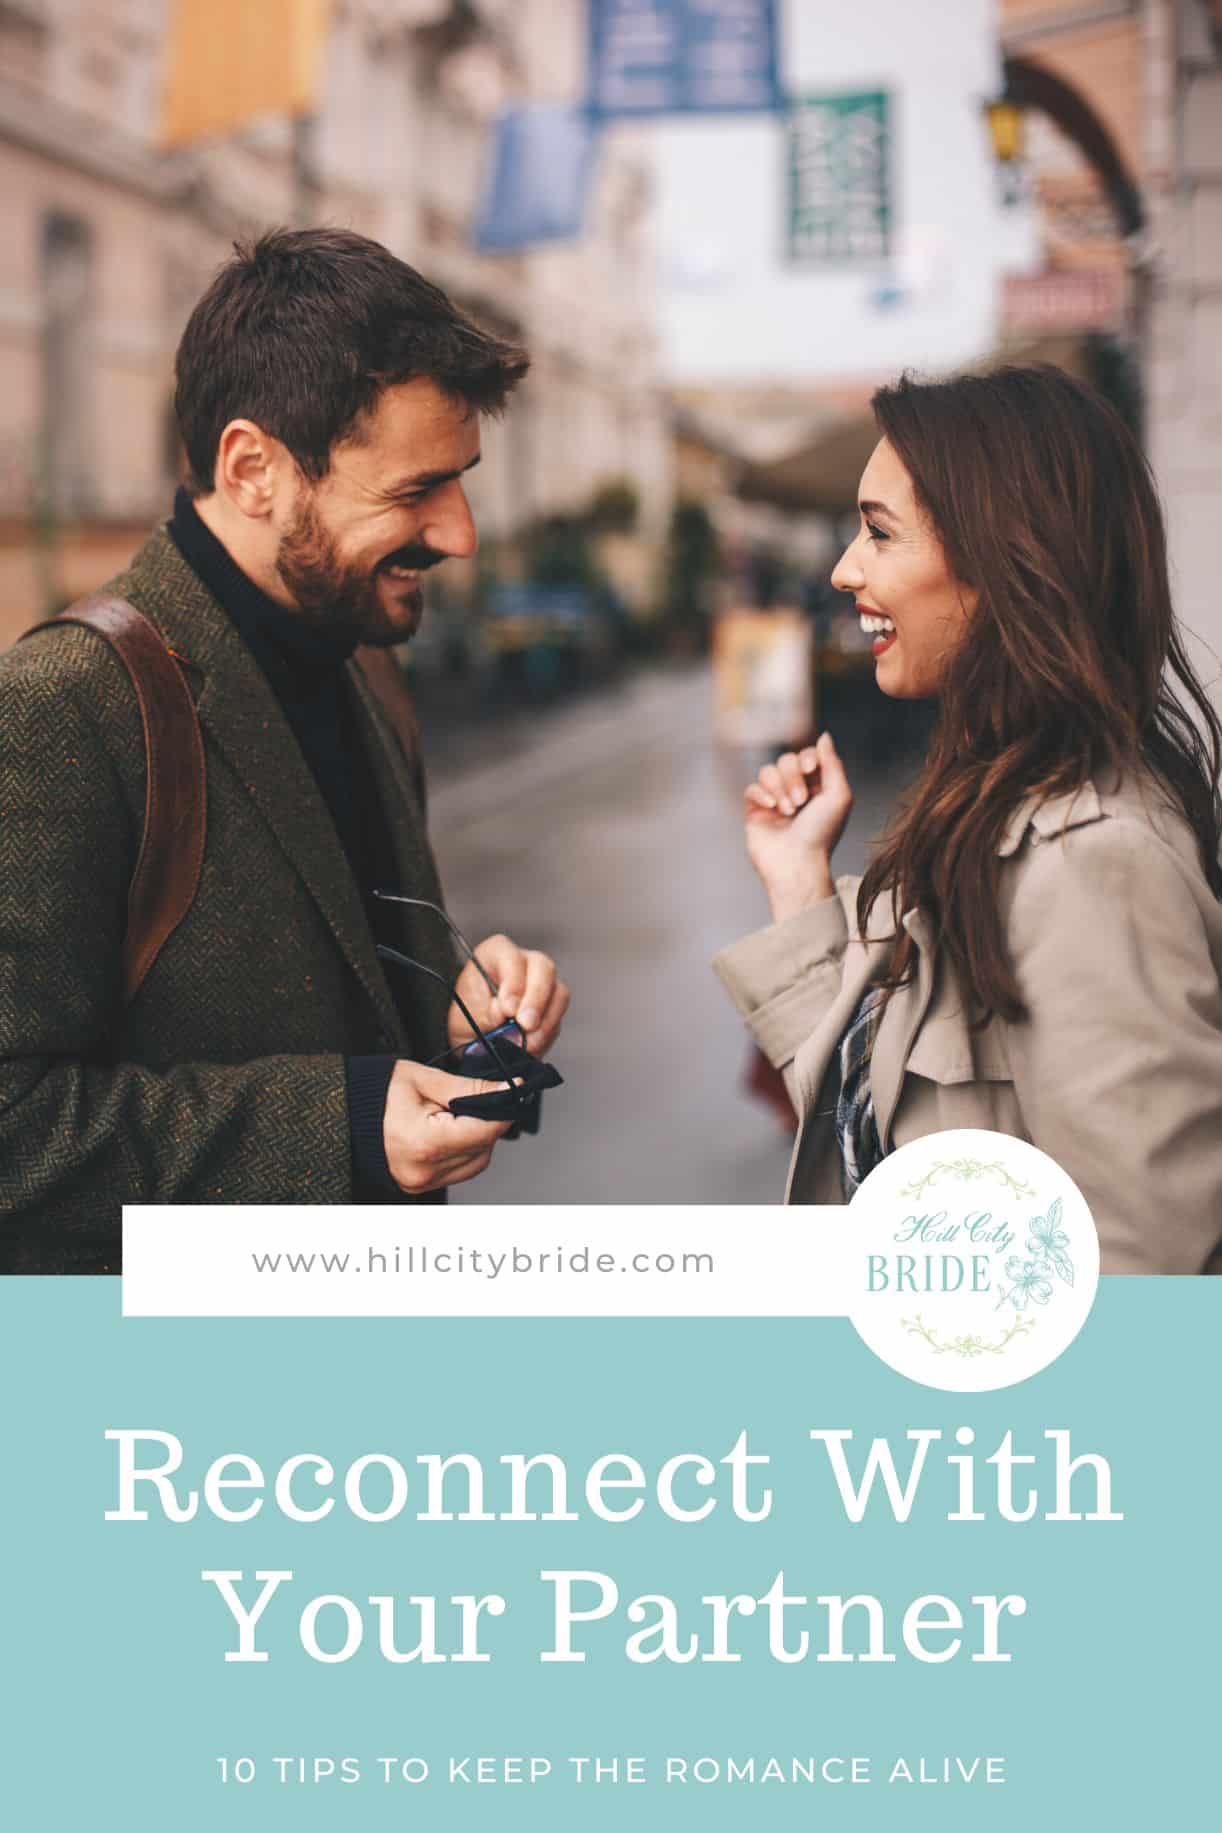 What to Do to Reconnect With Your Partner